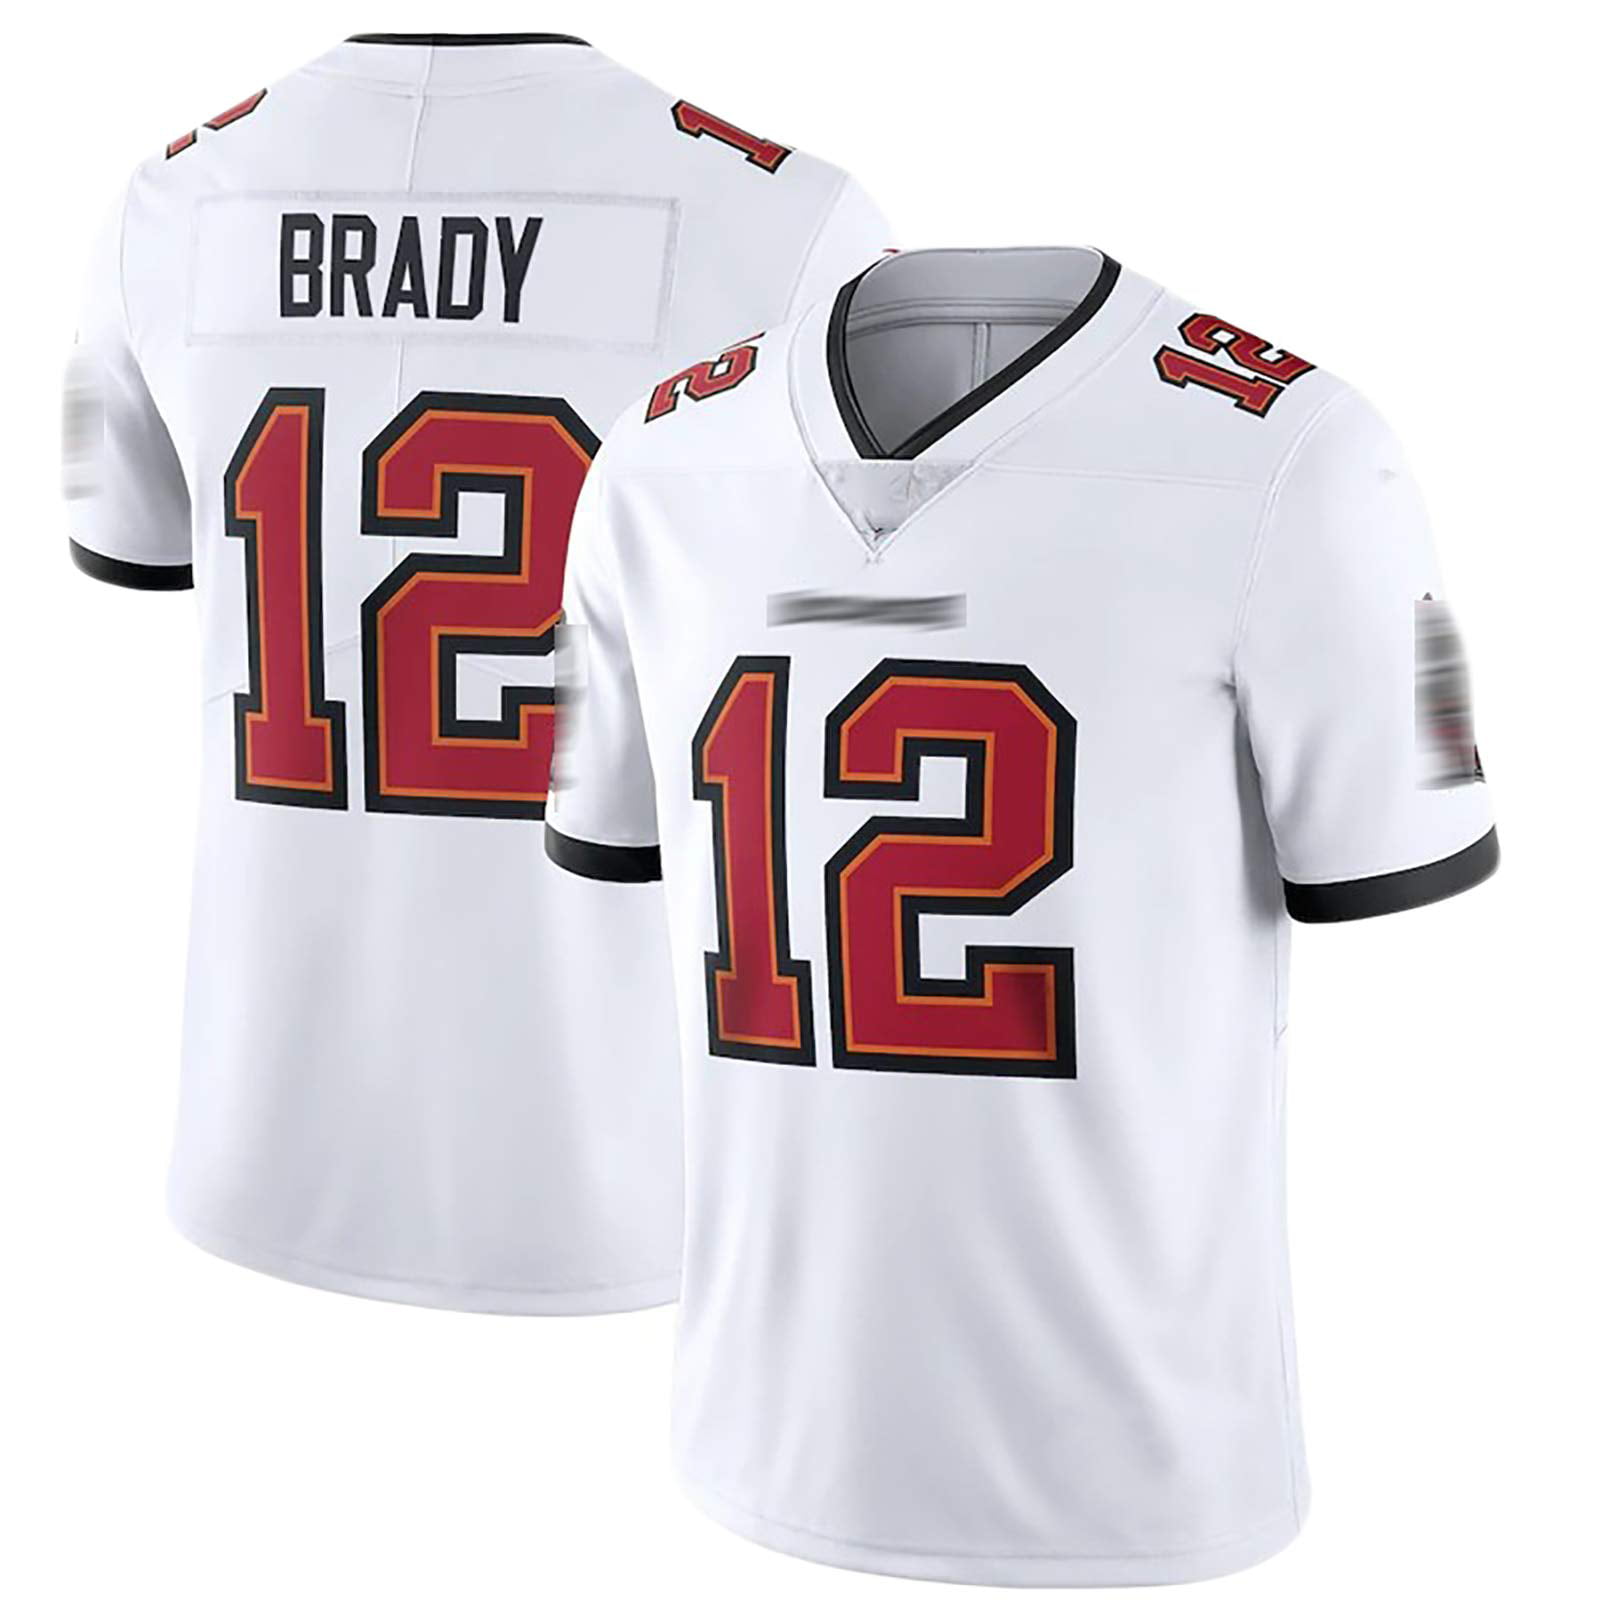 Mens American Football Jersey for Buccaneers 12 Brady Jersey Rugby Training T-Shirt The Greatest Quarterback in History Embroidery Uniform White-2XL 